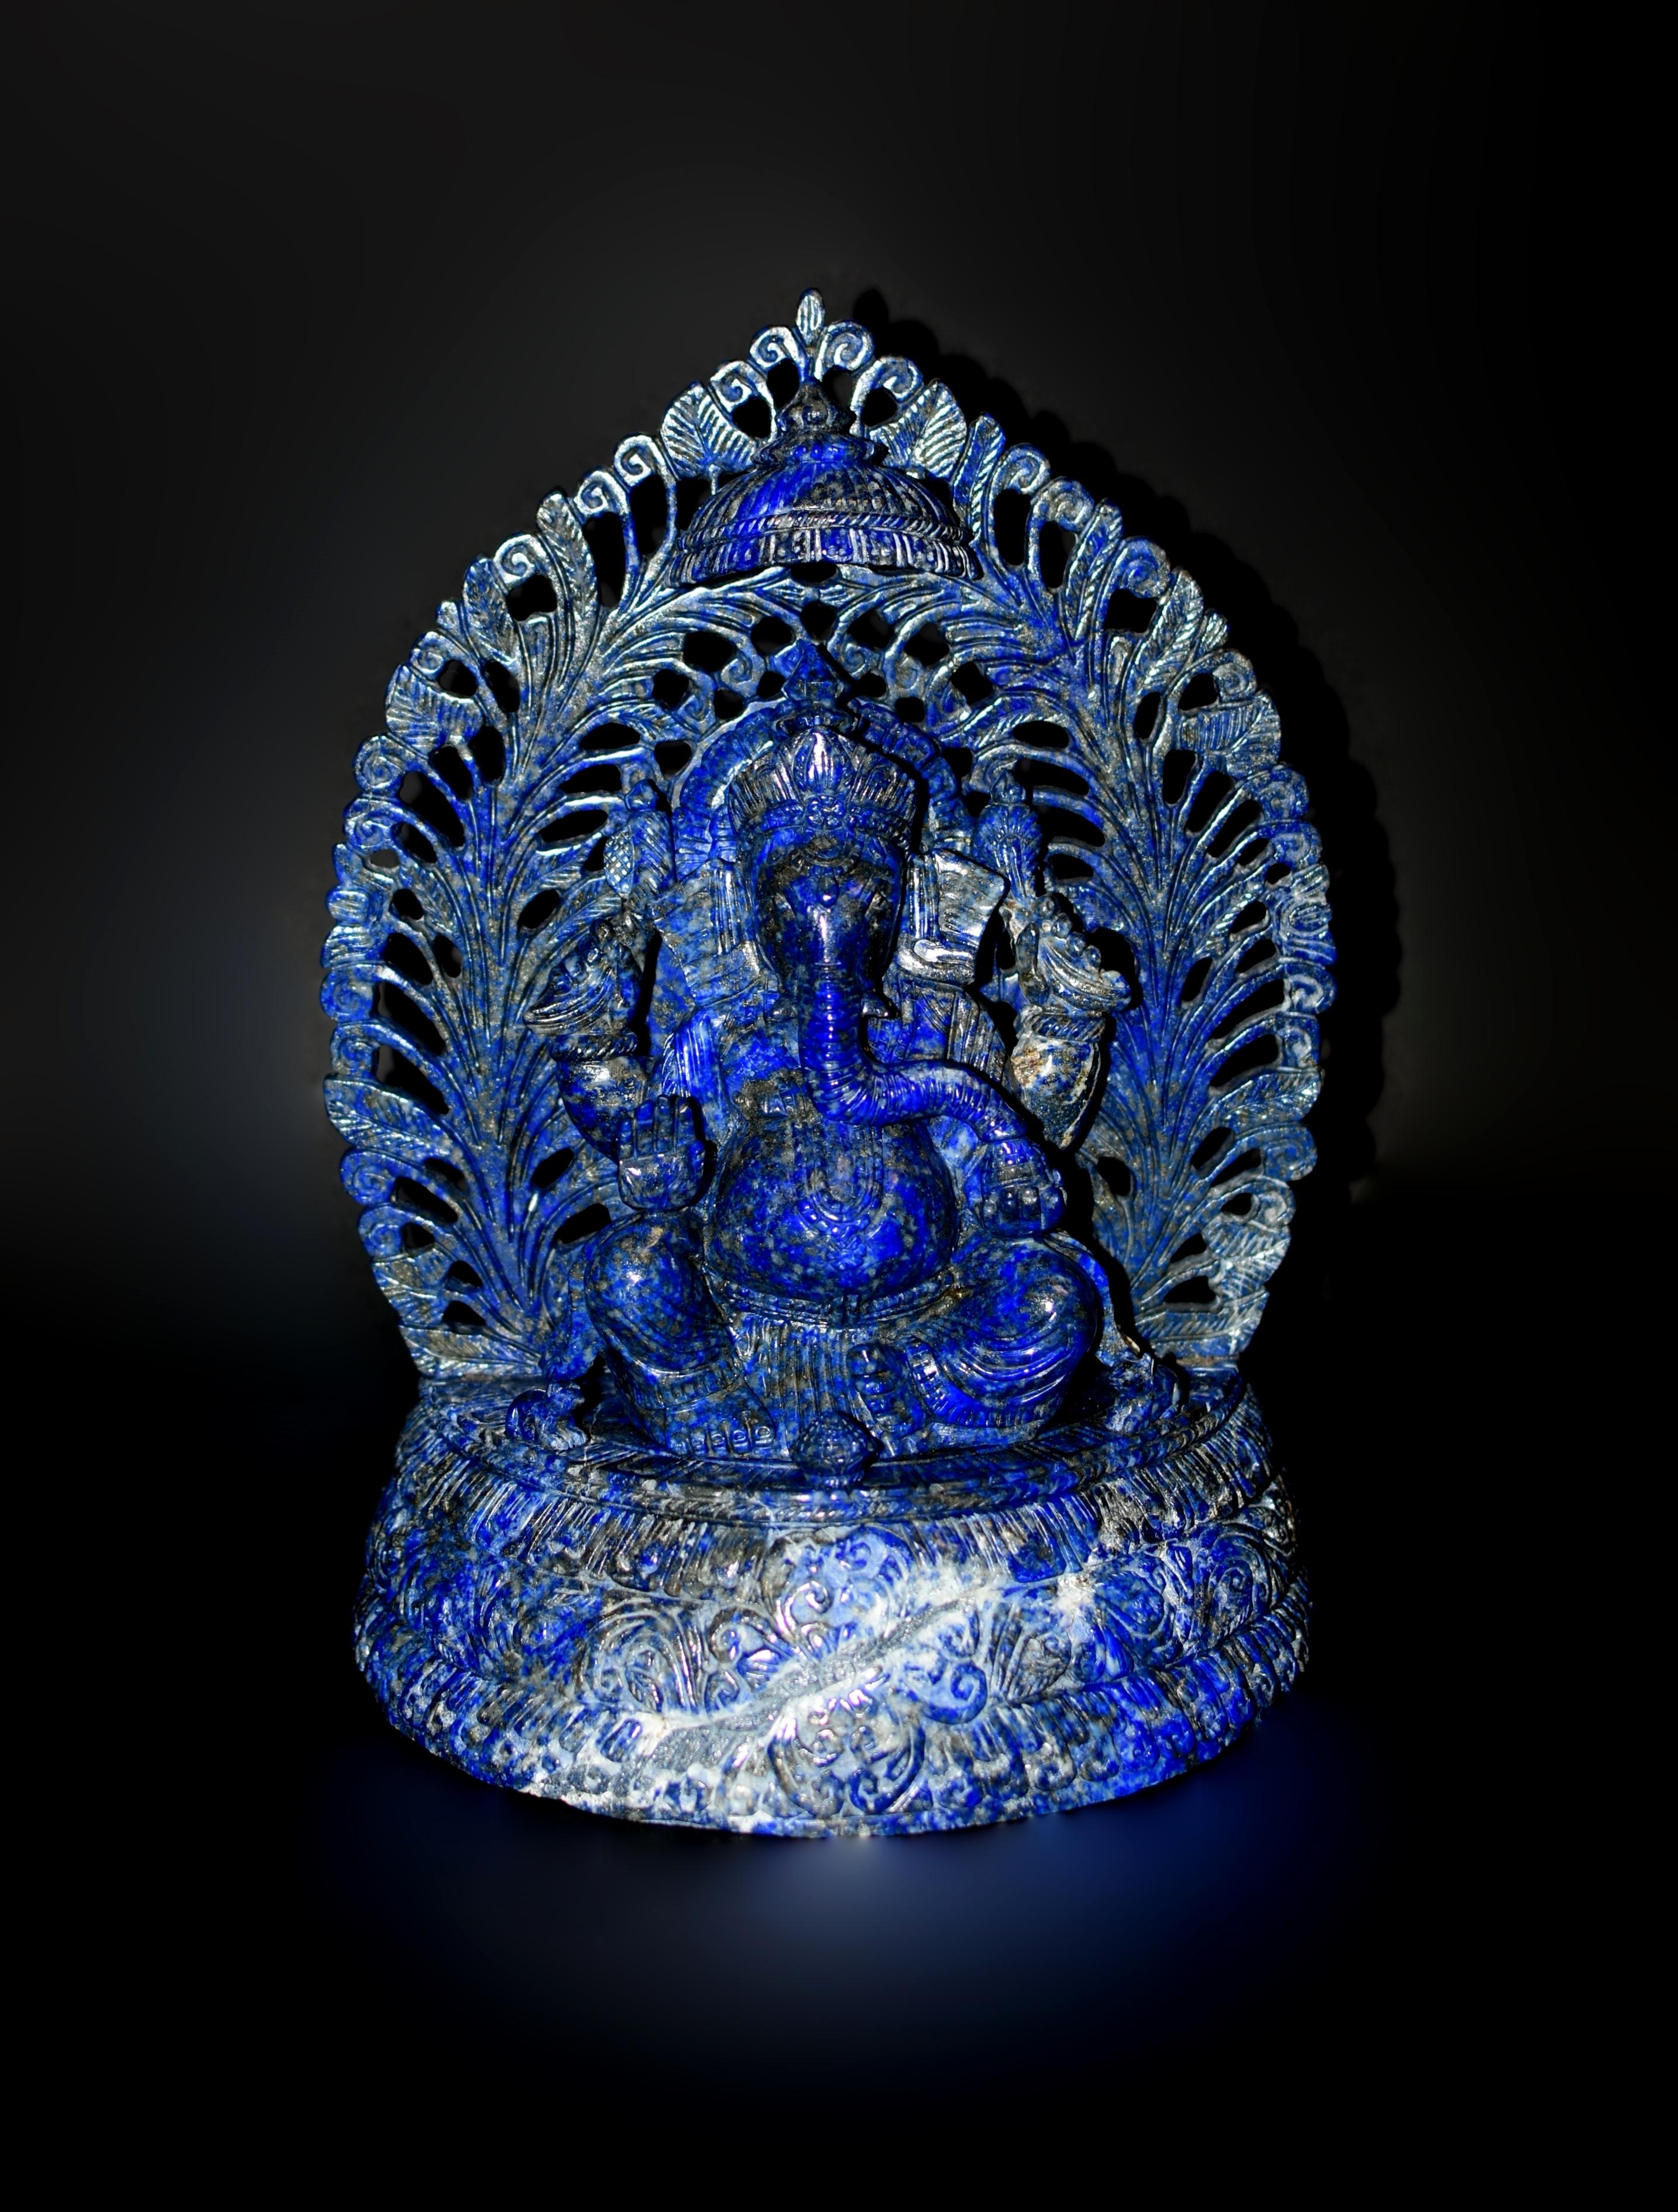 The 9-lb hand-carved natural lapis Ganesh statue is a testament to both artistic brilliance and spiritual symbolism. Adorned in a bejeweled crown, gazing gently with prominent elephantine features, the deity is draped in long necklaces and a cobra